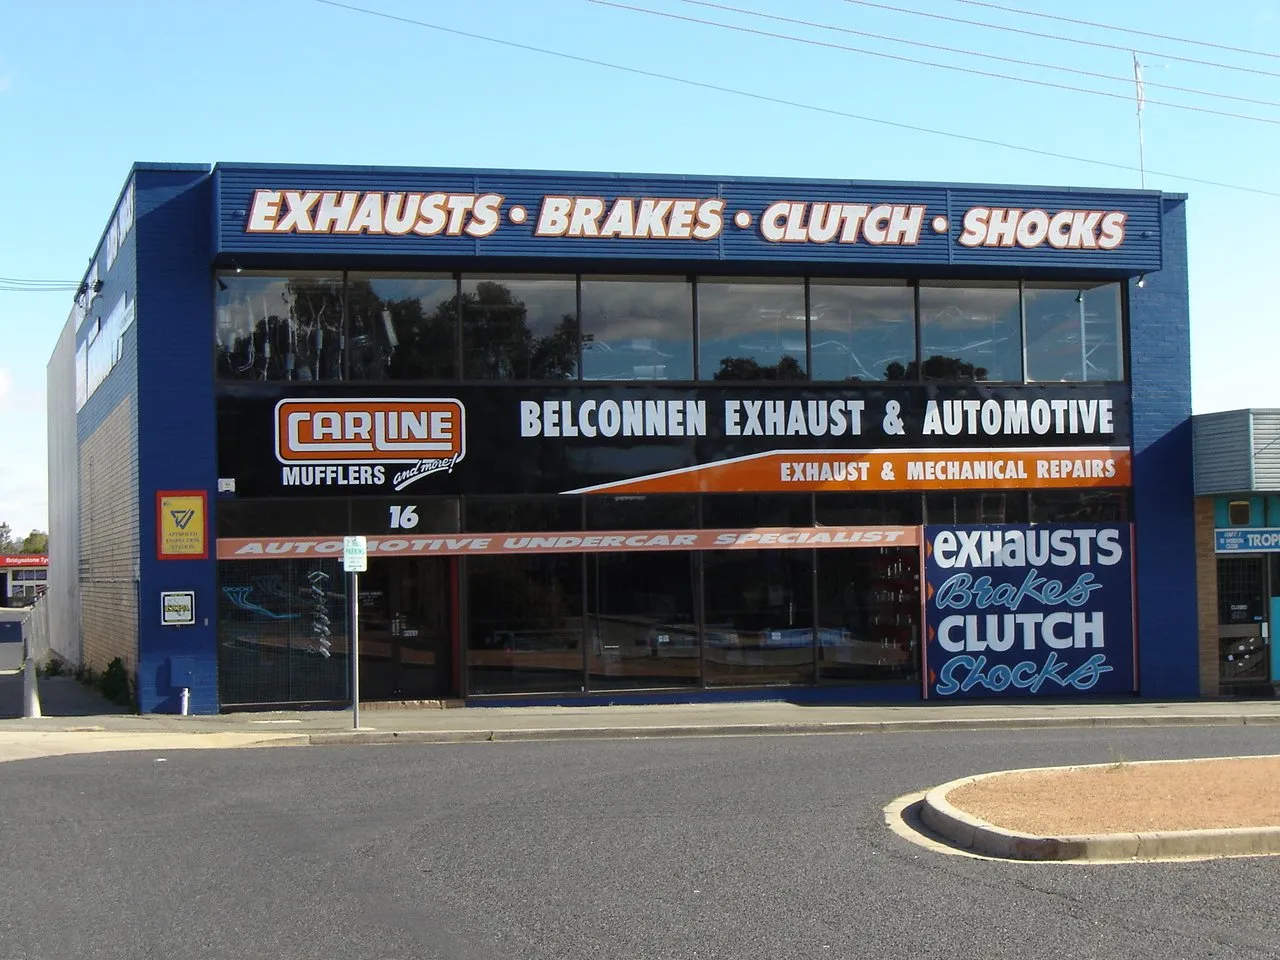 Our Belconnen location